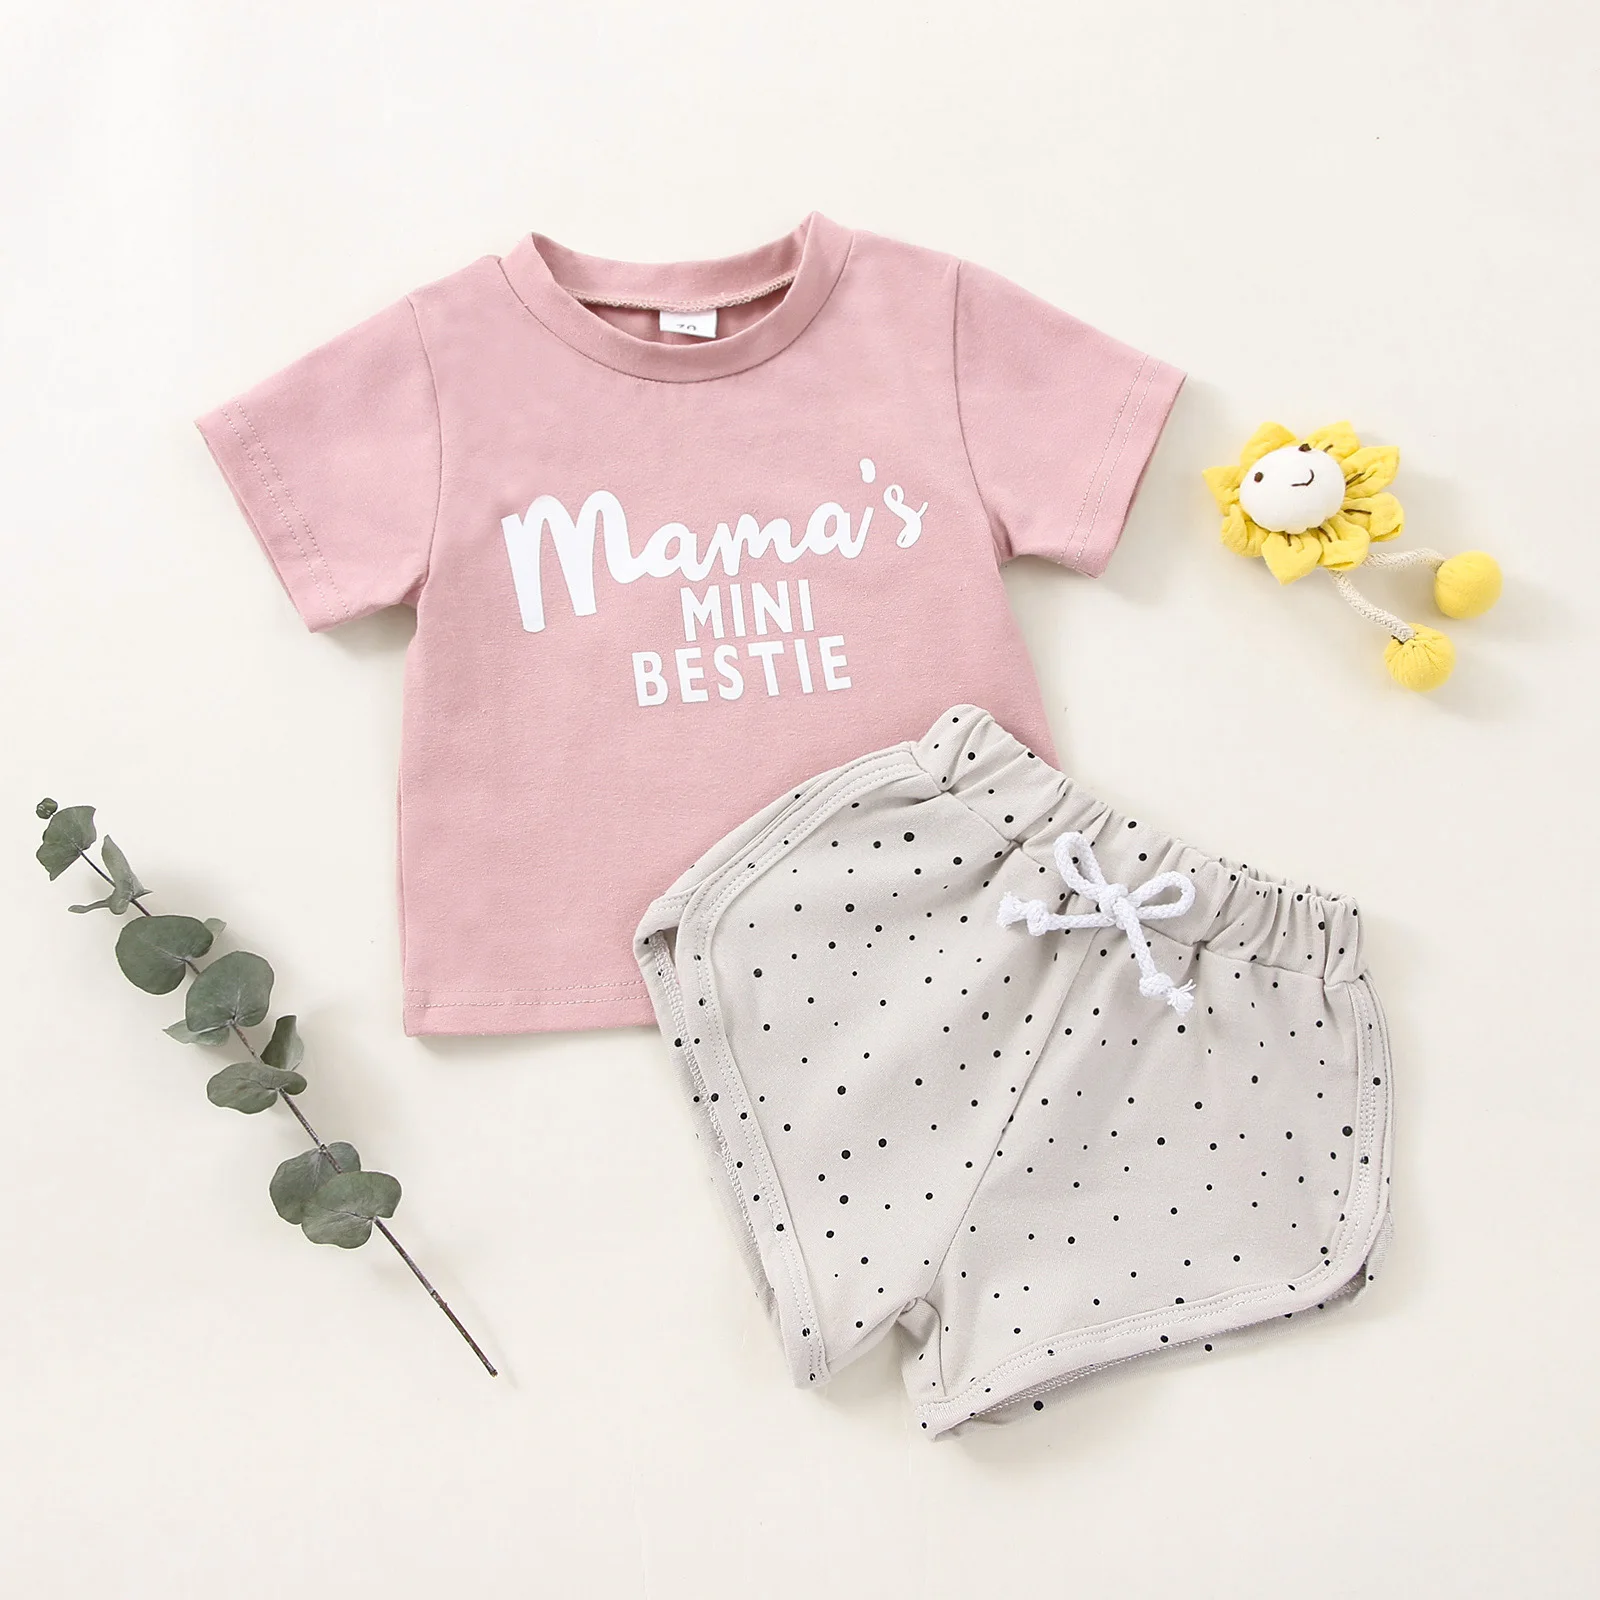 2022 0-24M Baby Summer Clothes Set MAMA GIRL/BOY/MINI BESTIE Letter Print Short Sleeve Round Neck T-shirt+Dot Shorts Casual 2pcs Baby Clothing Set best of sale